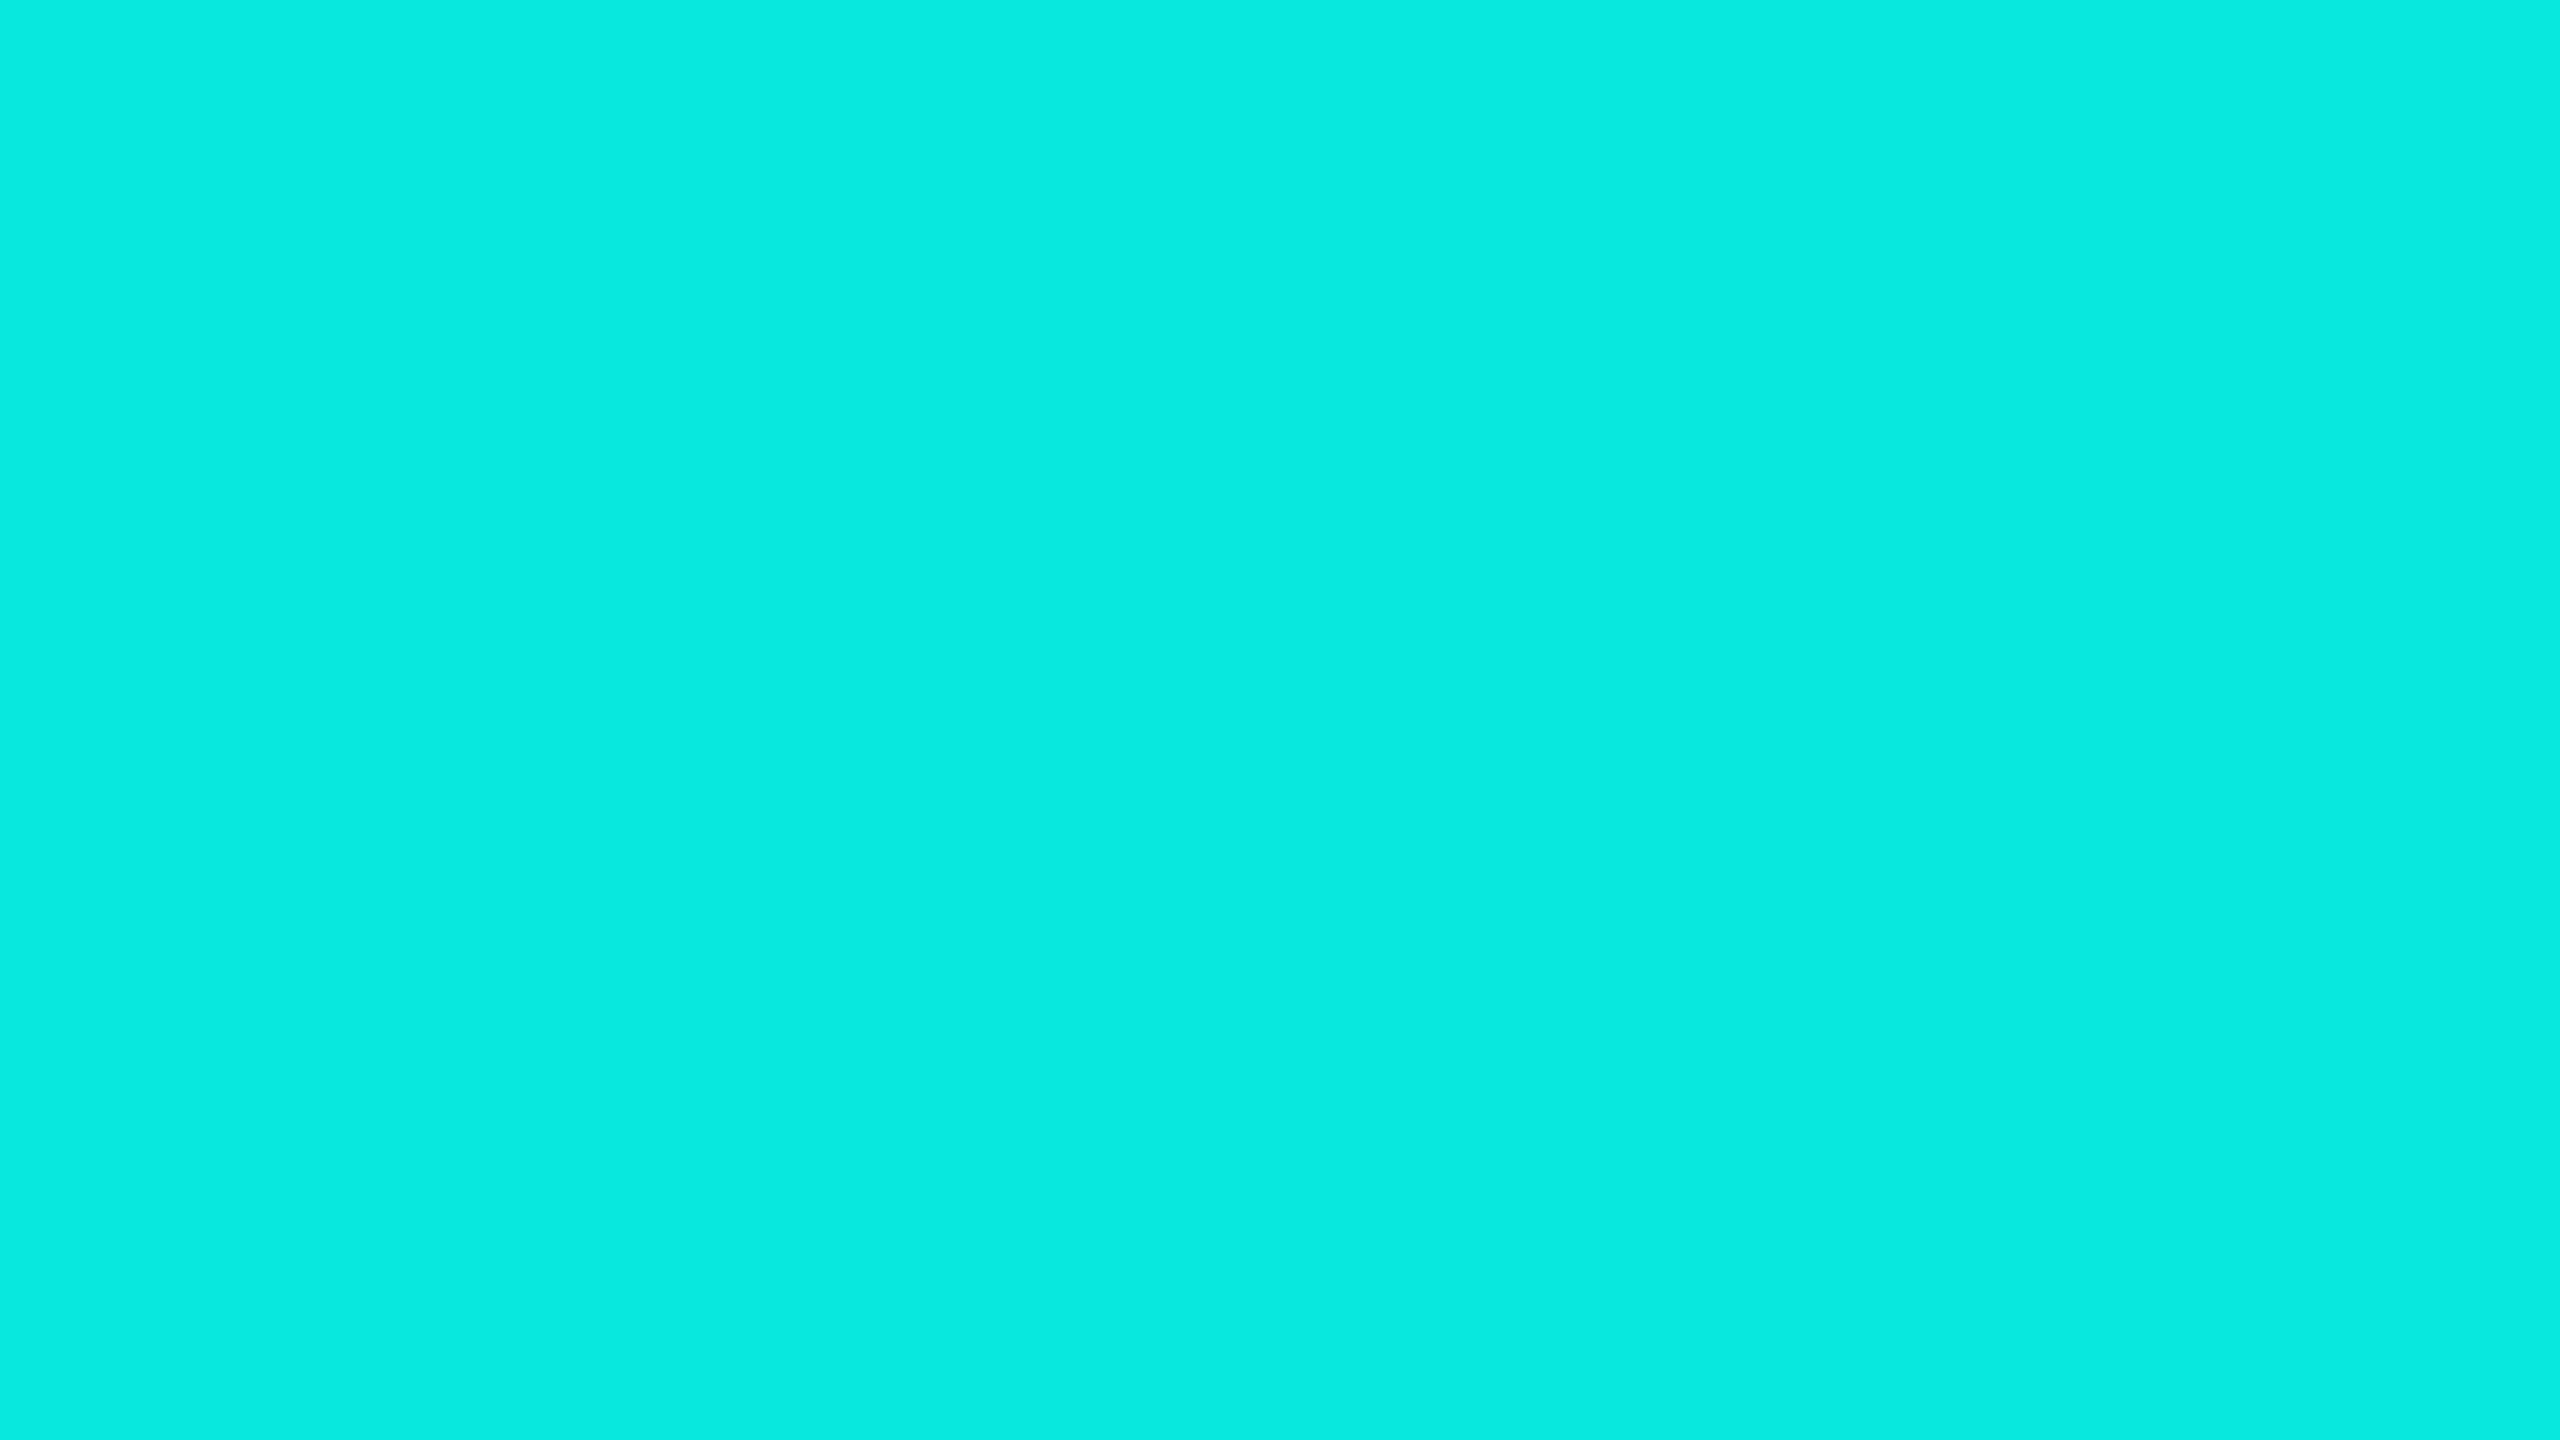 2560x1440 Bright Turquoise Solid Color Background